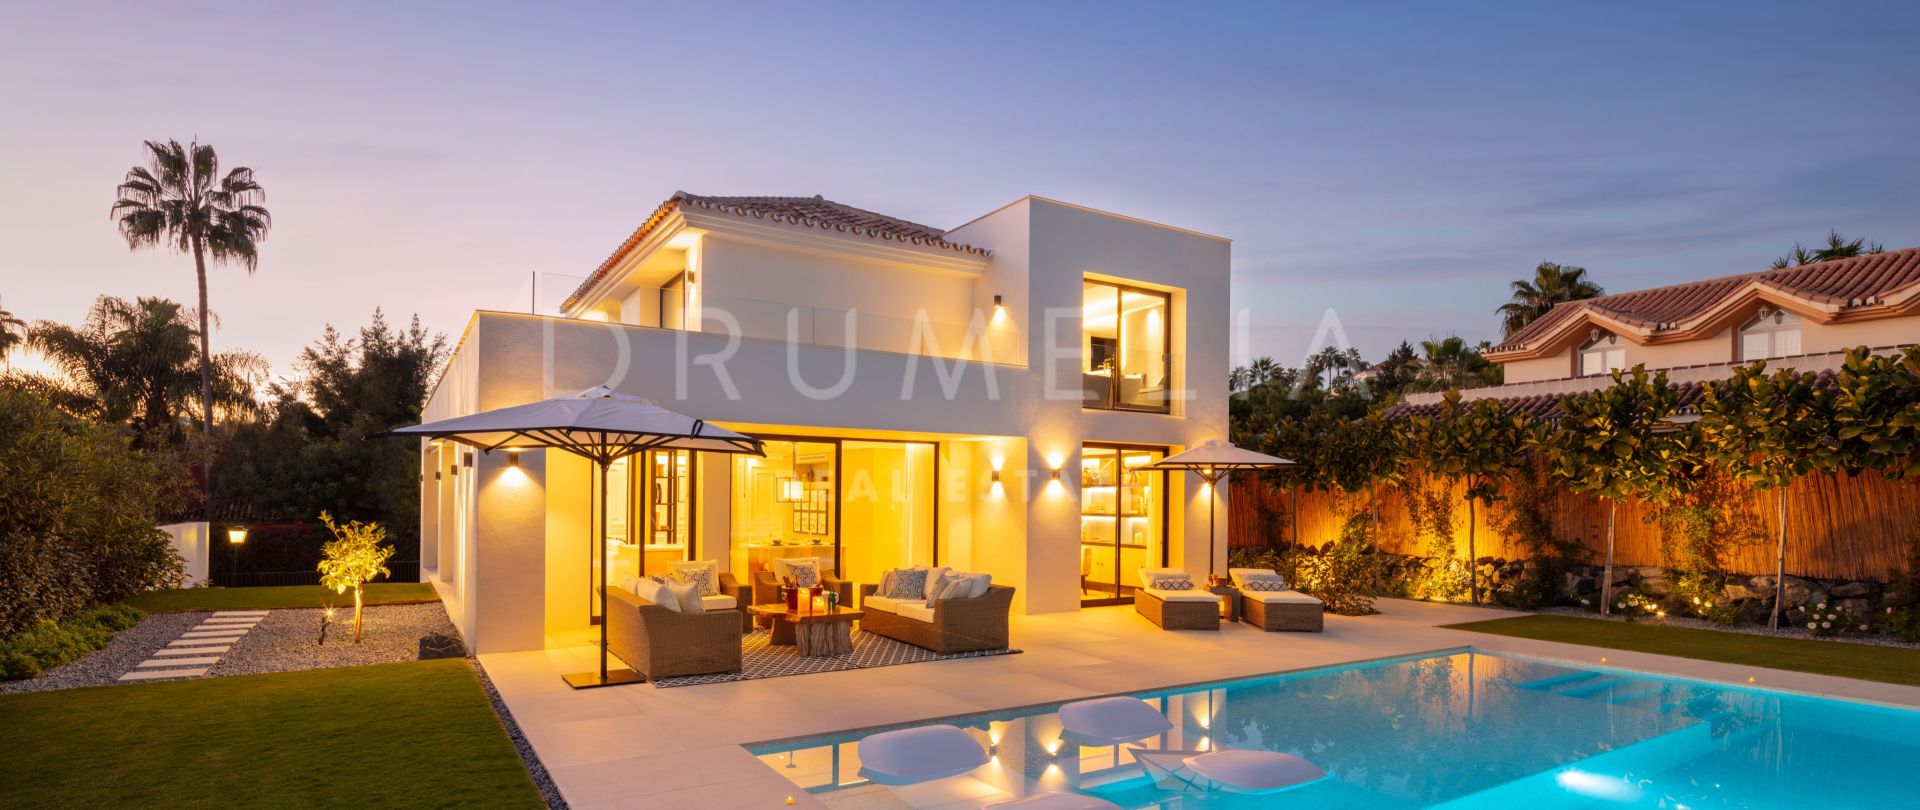 Spectacular modern villa with luxurious amenities in the Golf Valley of Nueva Andalucía, Marbella